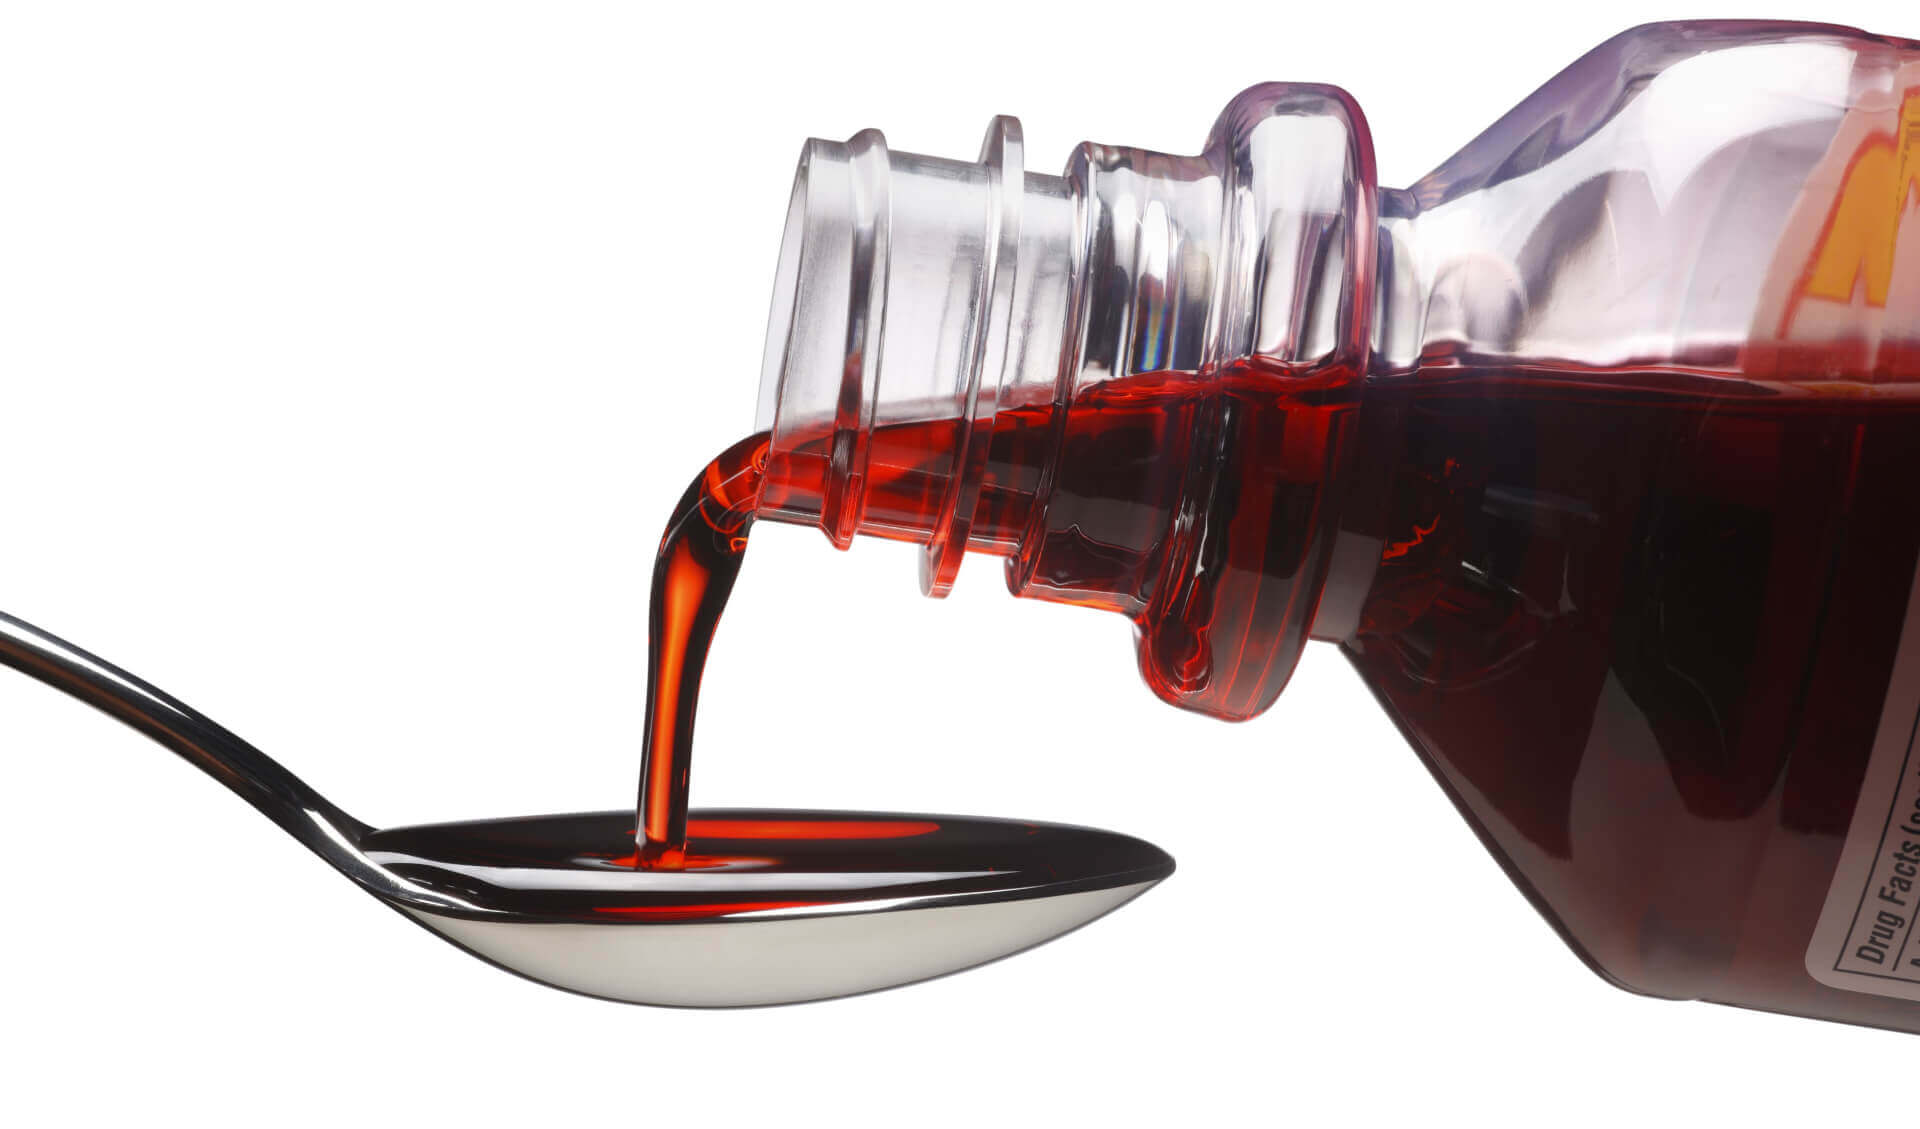 WHO Issues Warning Against Yet Another Substandard India-Made Cough Syrup